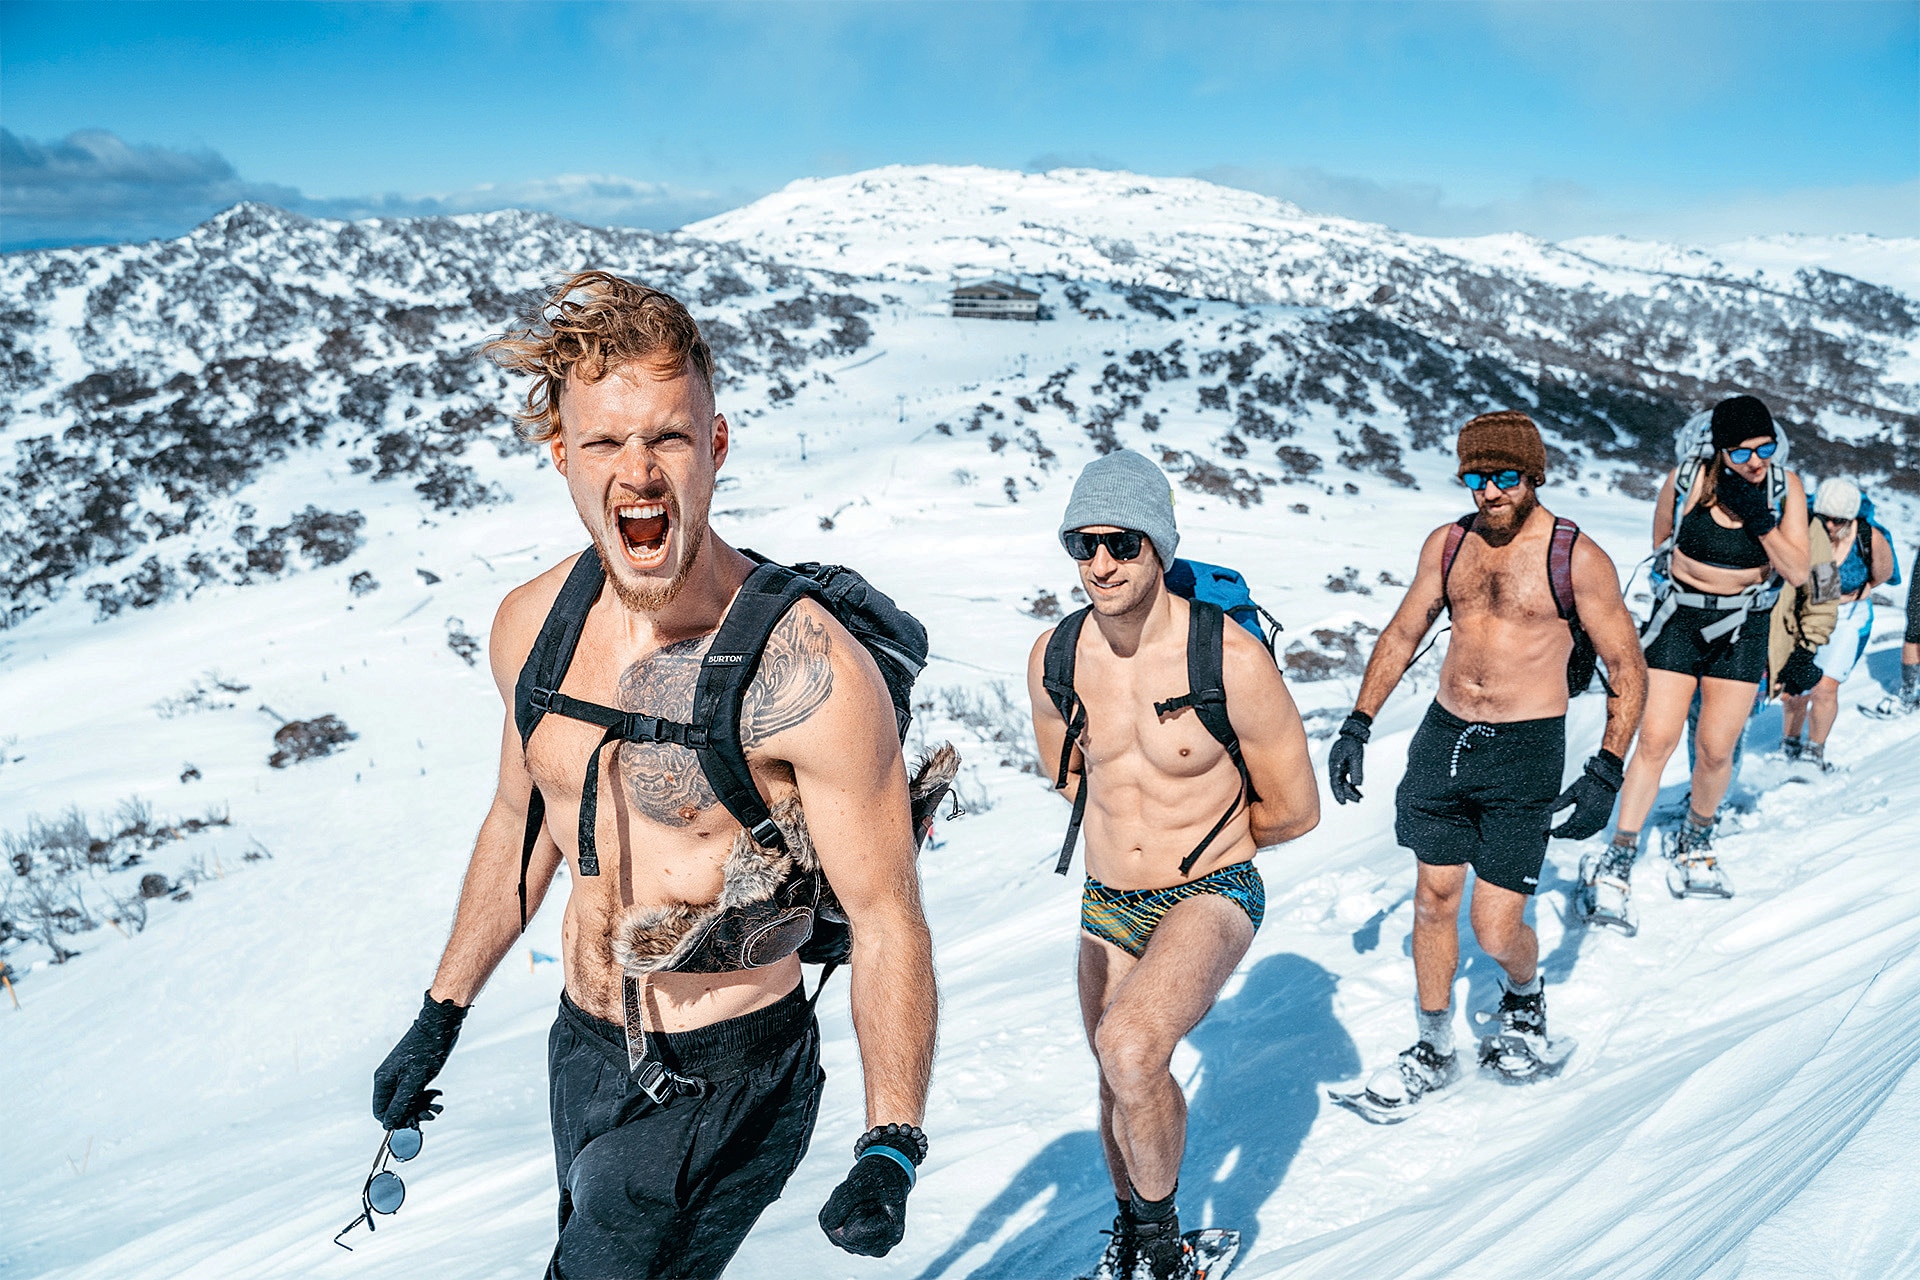 Snowy Mountains retreats with the Wim Hof Method